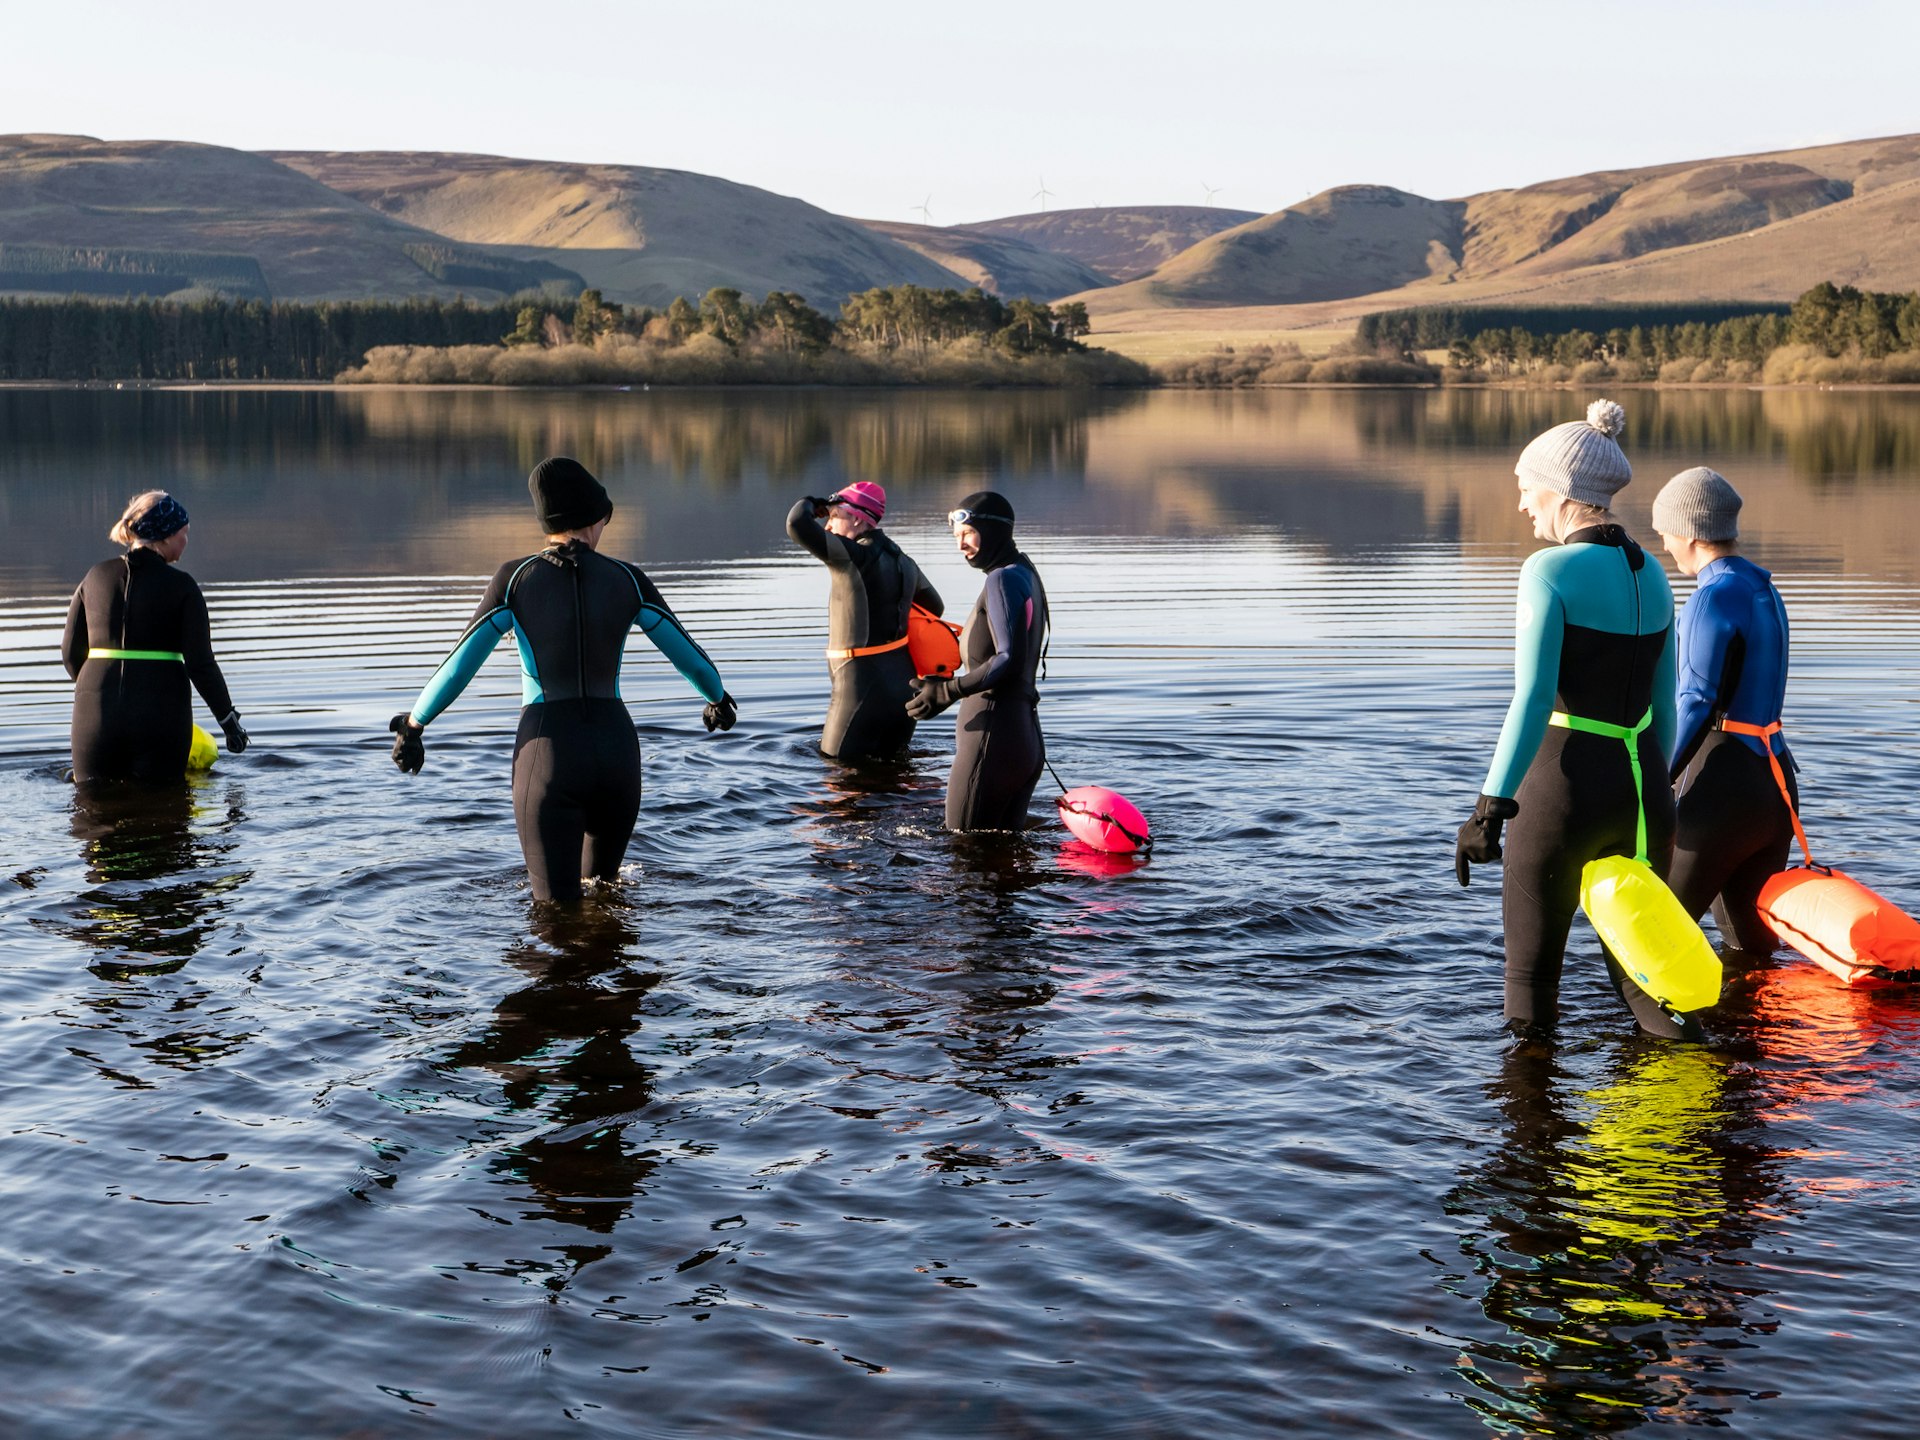 A group in wet suits ready to go to wild swimming in a freshwater reservoir in Scotland